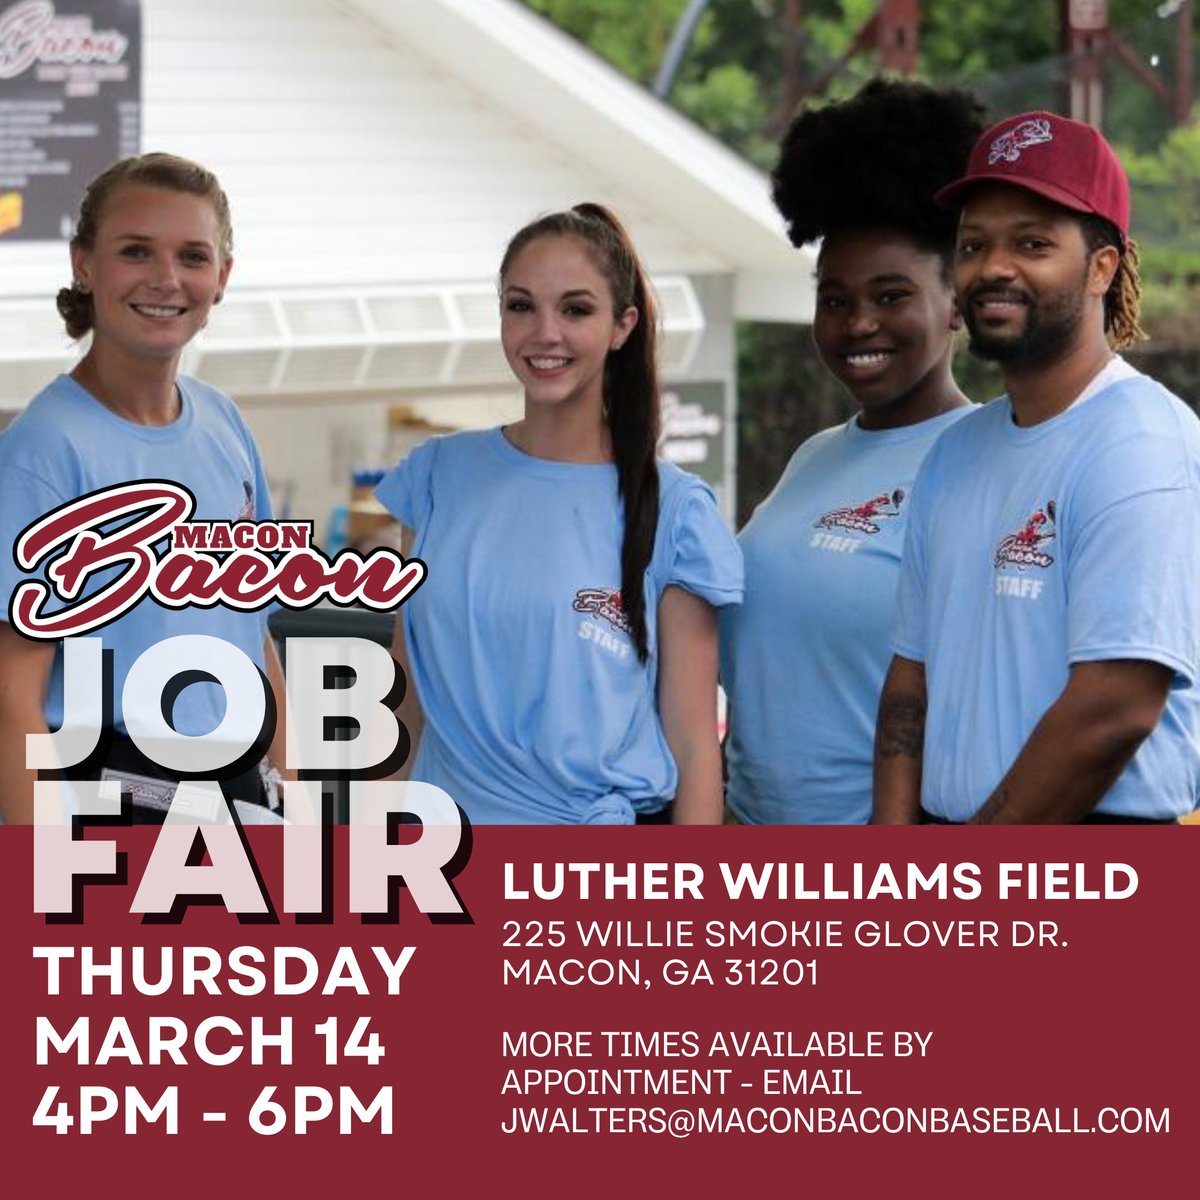 We're still looking for ushers, ticket scanners, cashiers, servers, security, customer service, and Sizzle Squad members for gamedays this season. Stop by our job fair today for your chance to join the most fun team in sports!